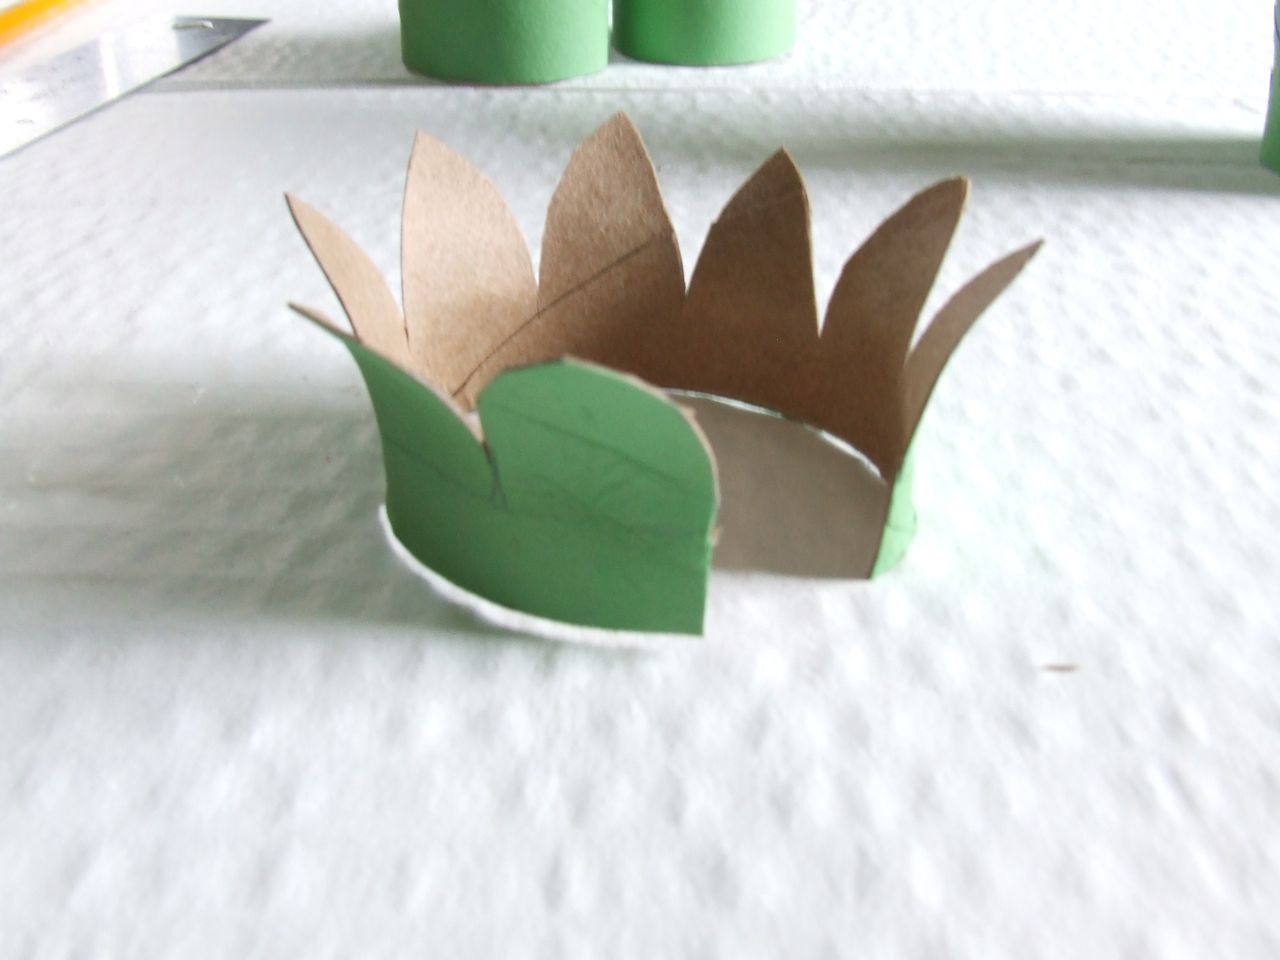 michele made me: Tutorial 1: Toilet Paper Roll Egg Carton Flowers